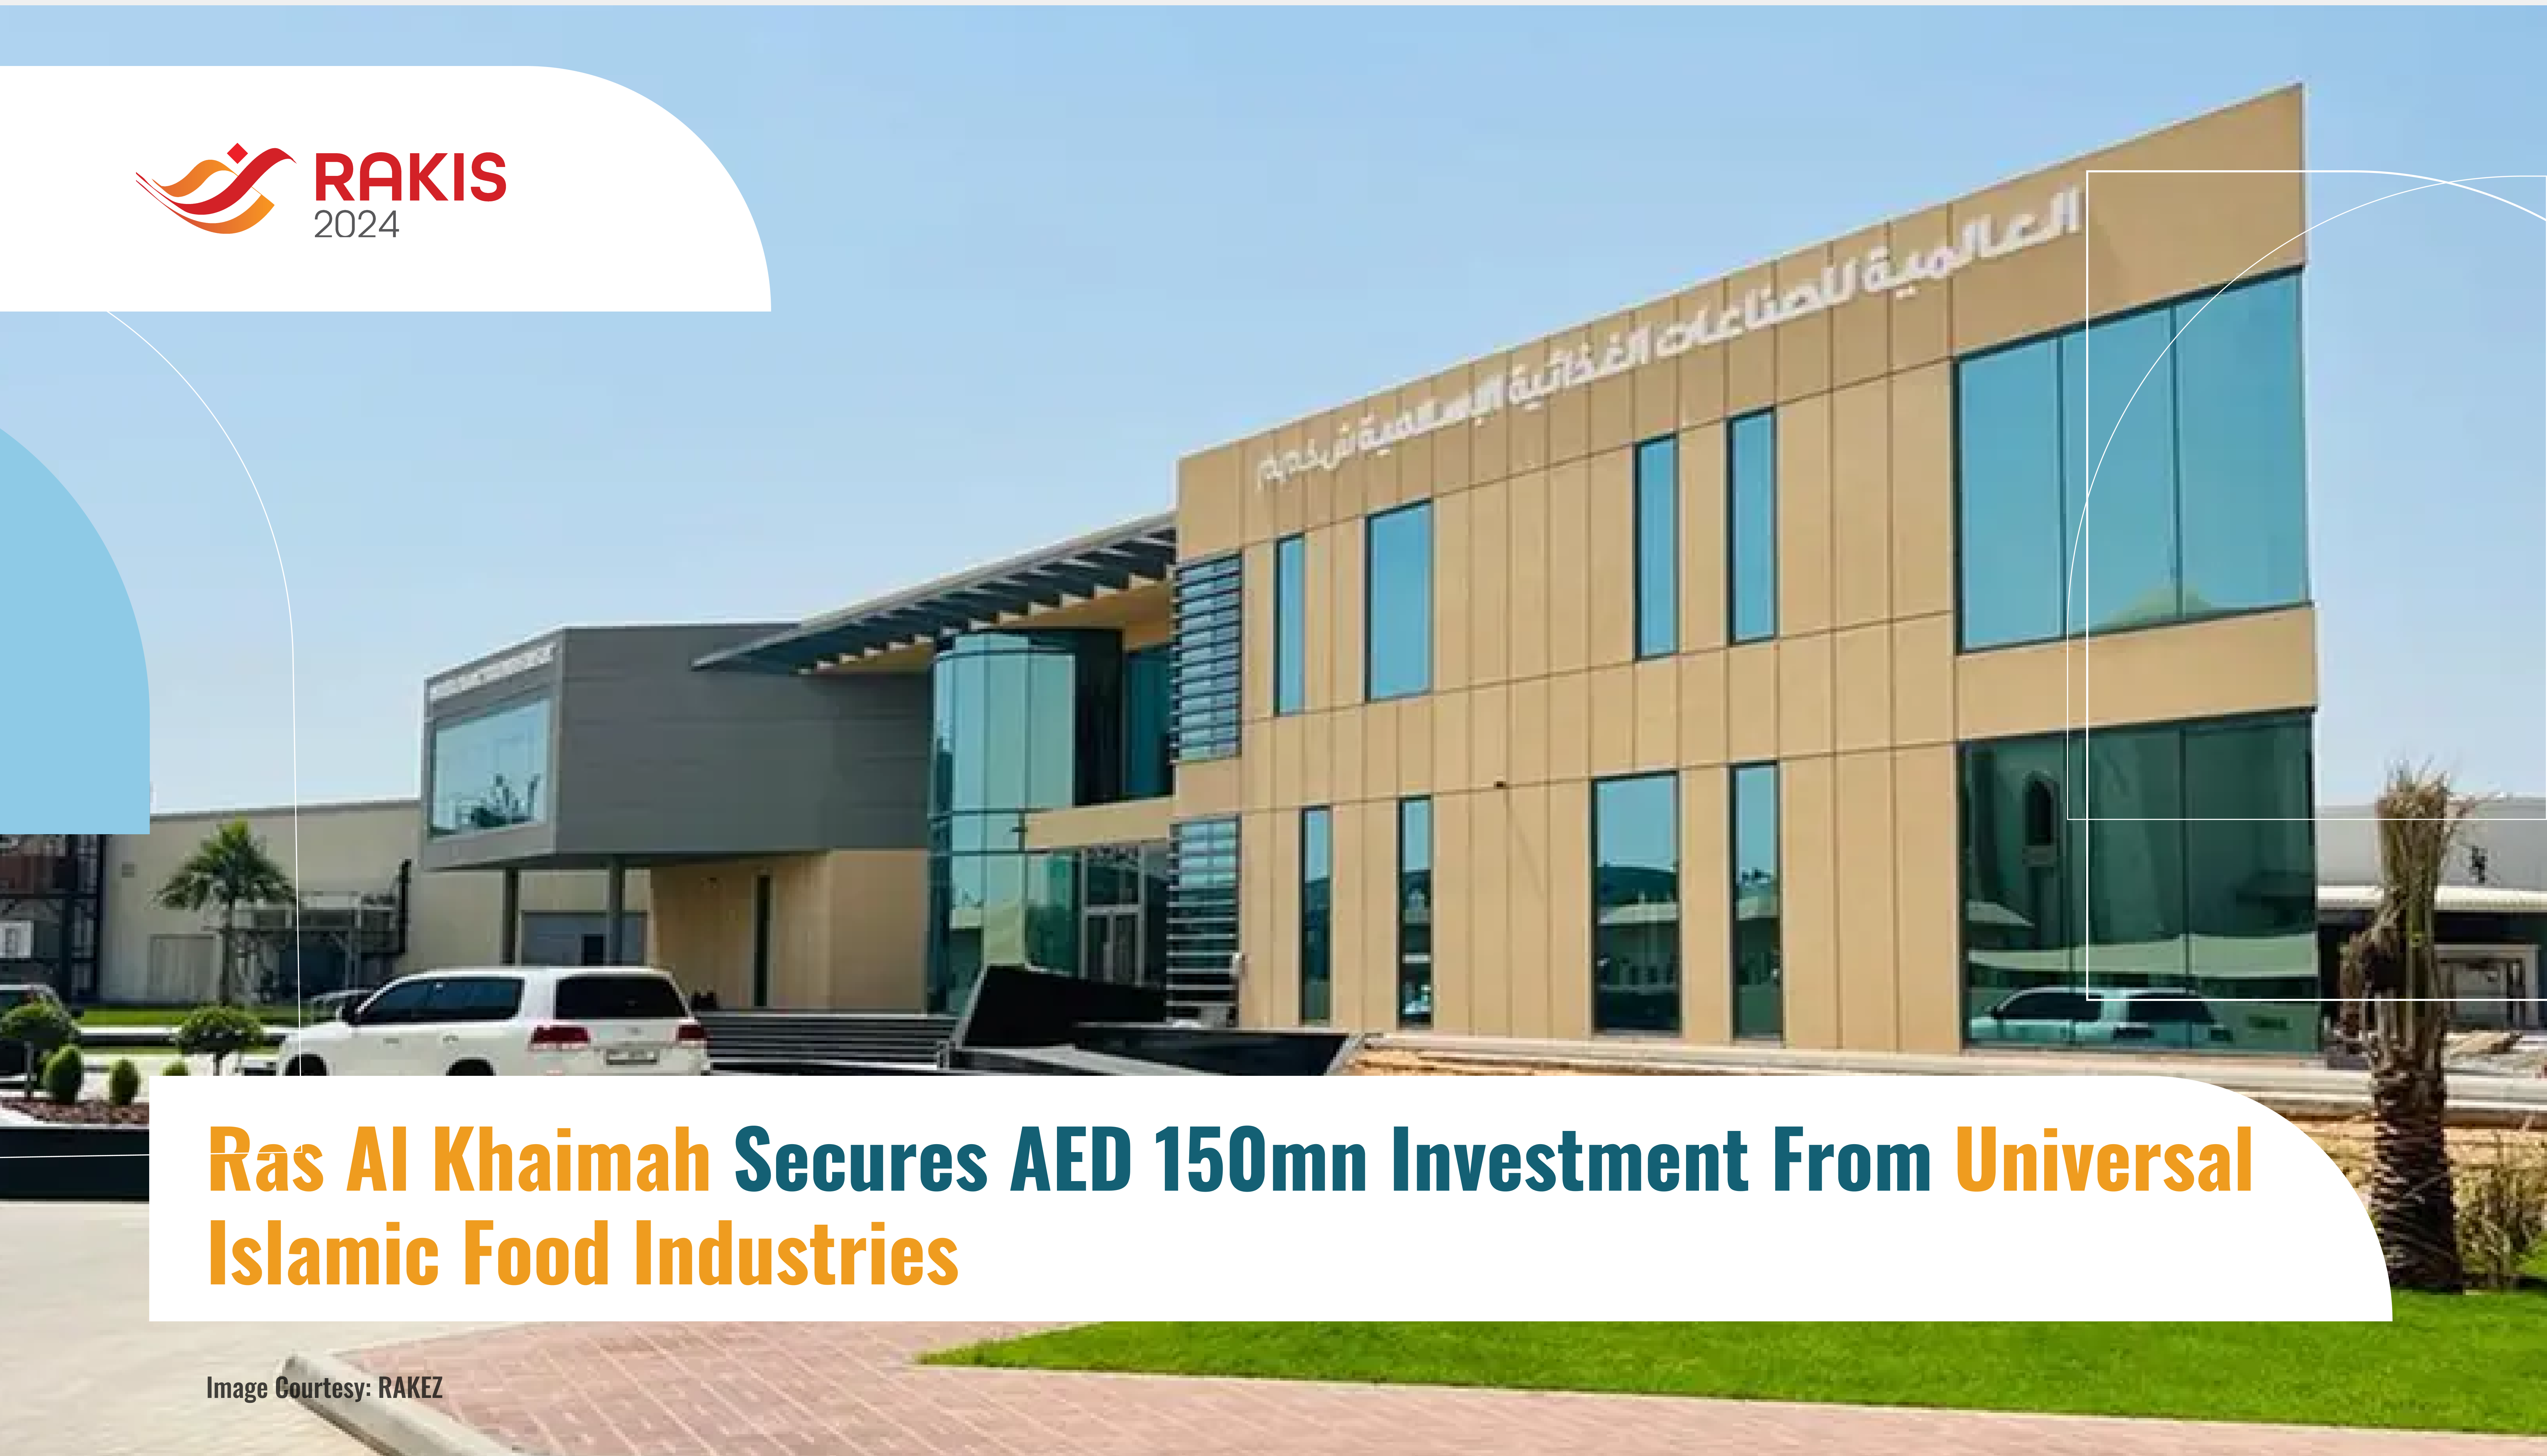 Ras Al Khaimah Secures AED 150mn Investment From Universal Islamic Food Industries